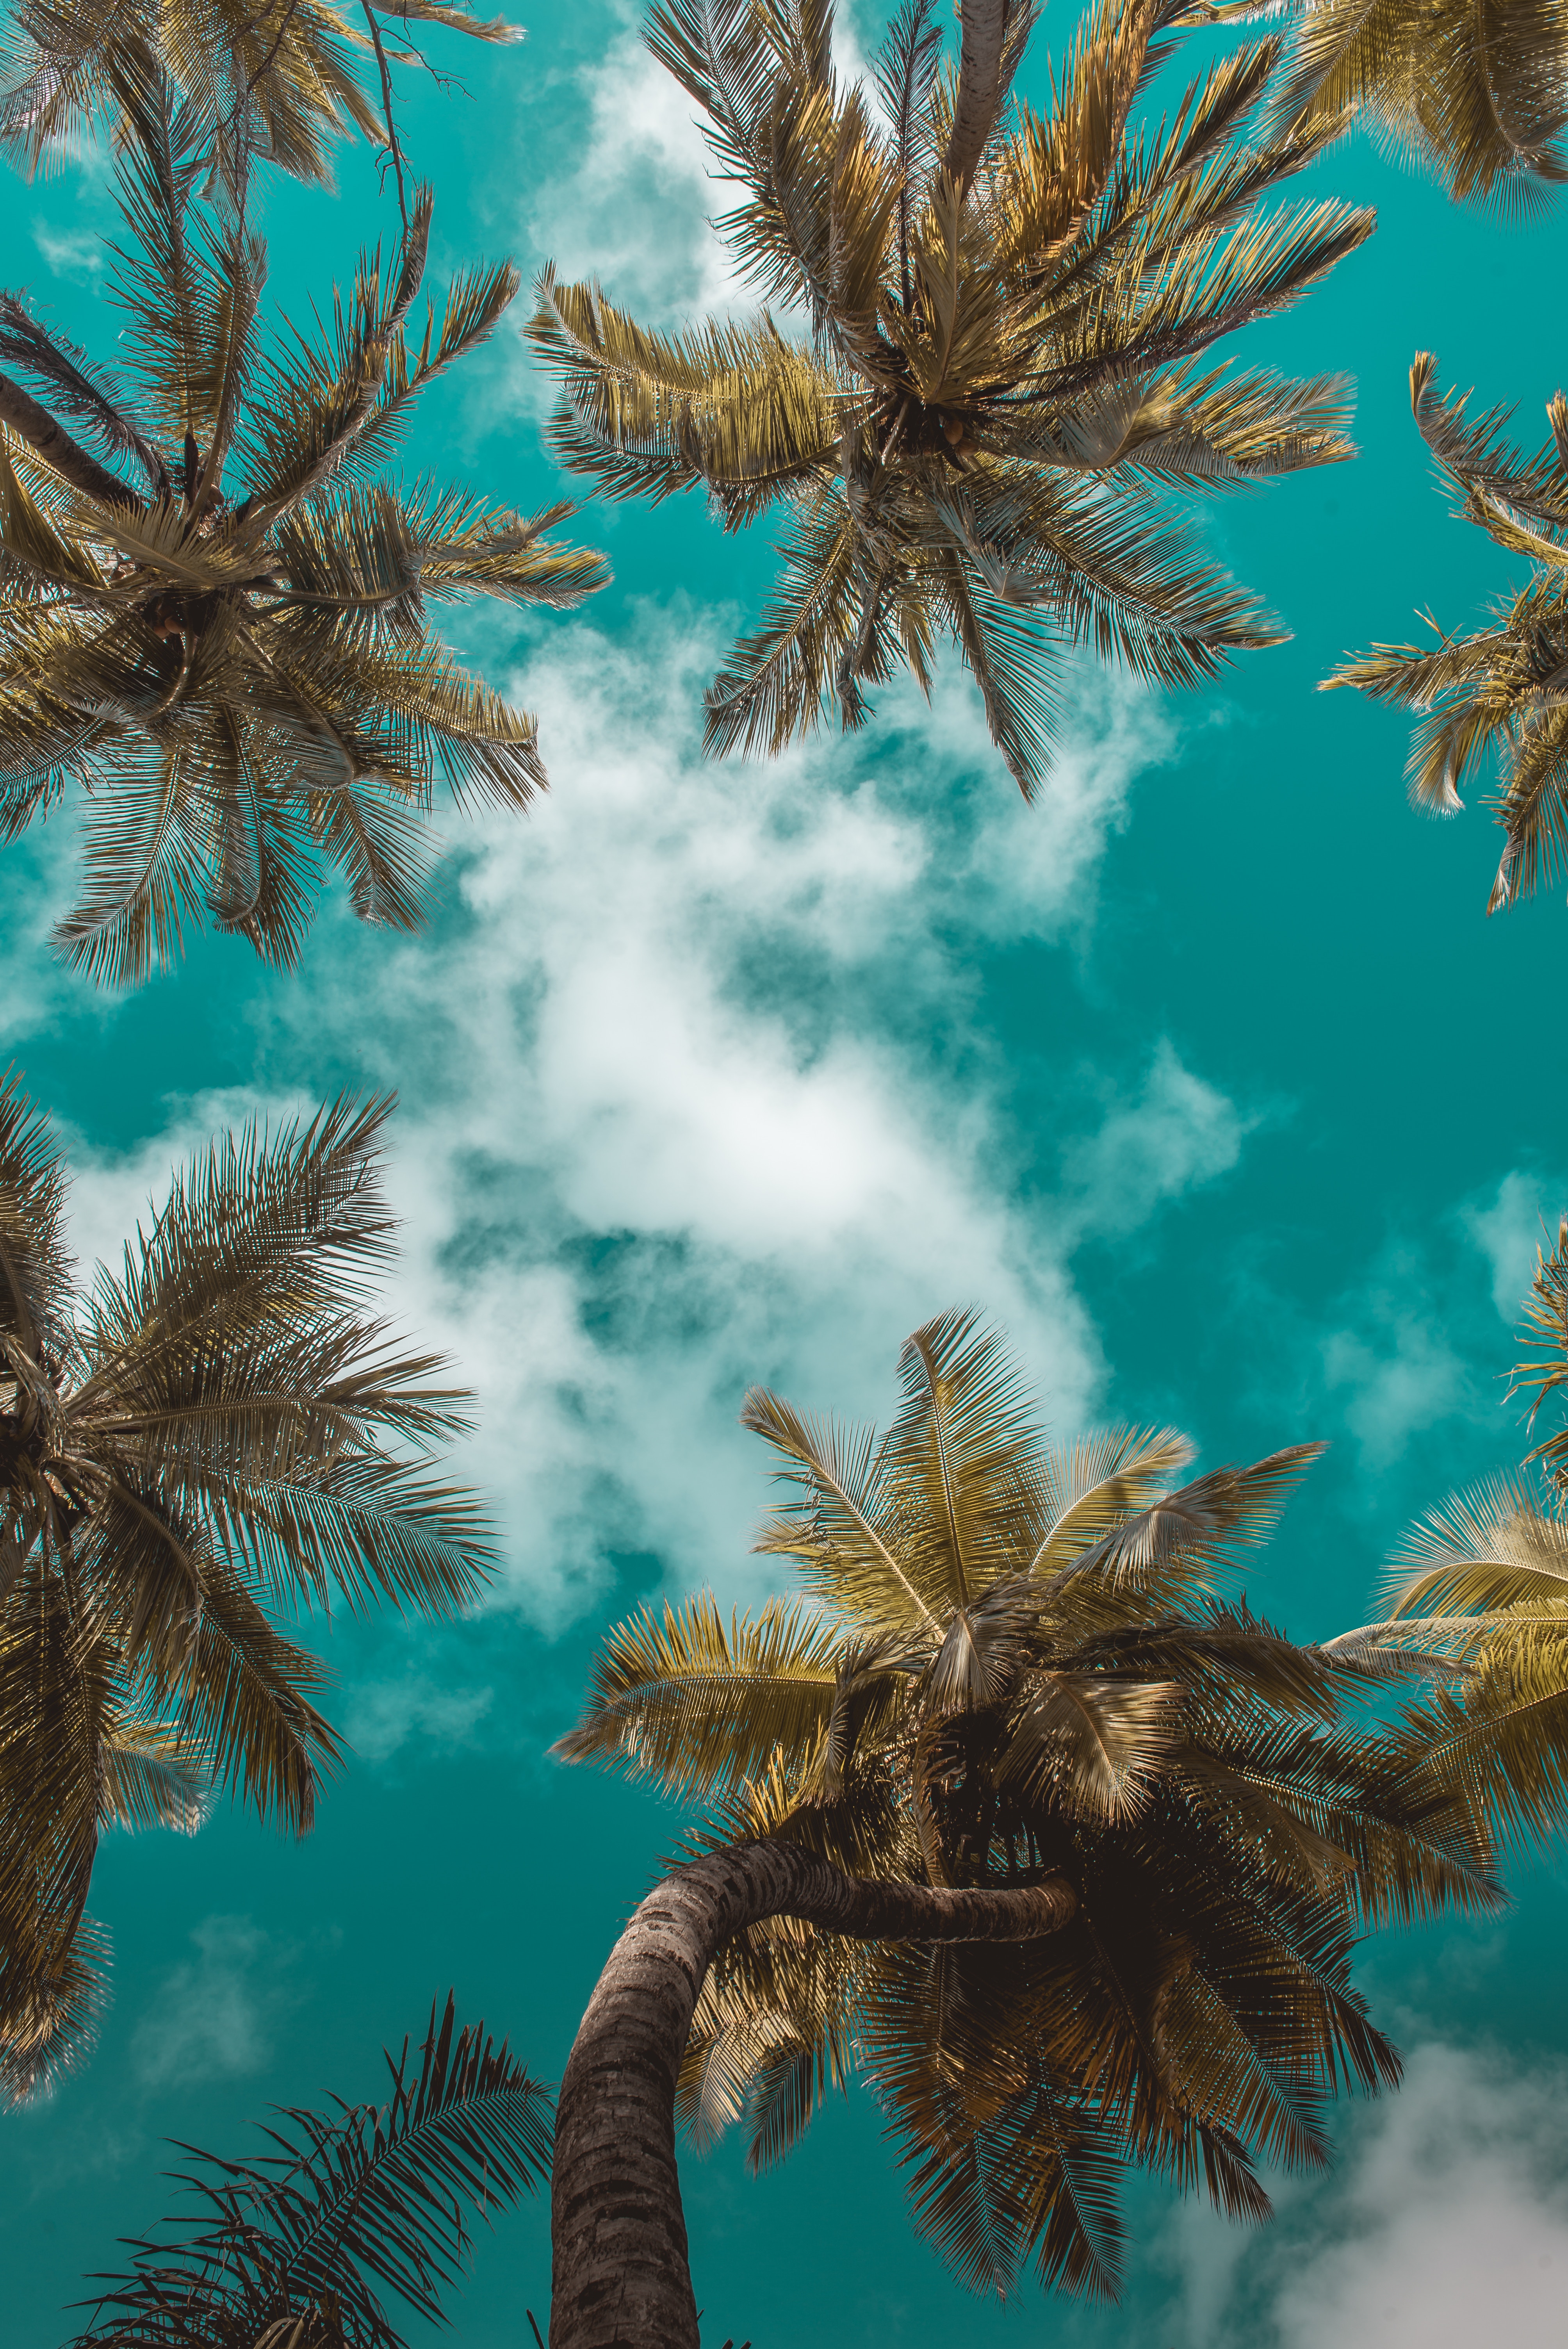 leaves, palms, nature, branches, sky, clouds, tropics, bottom view